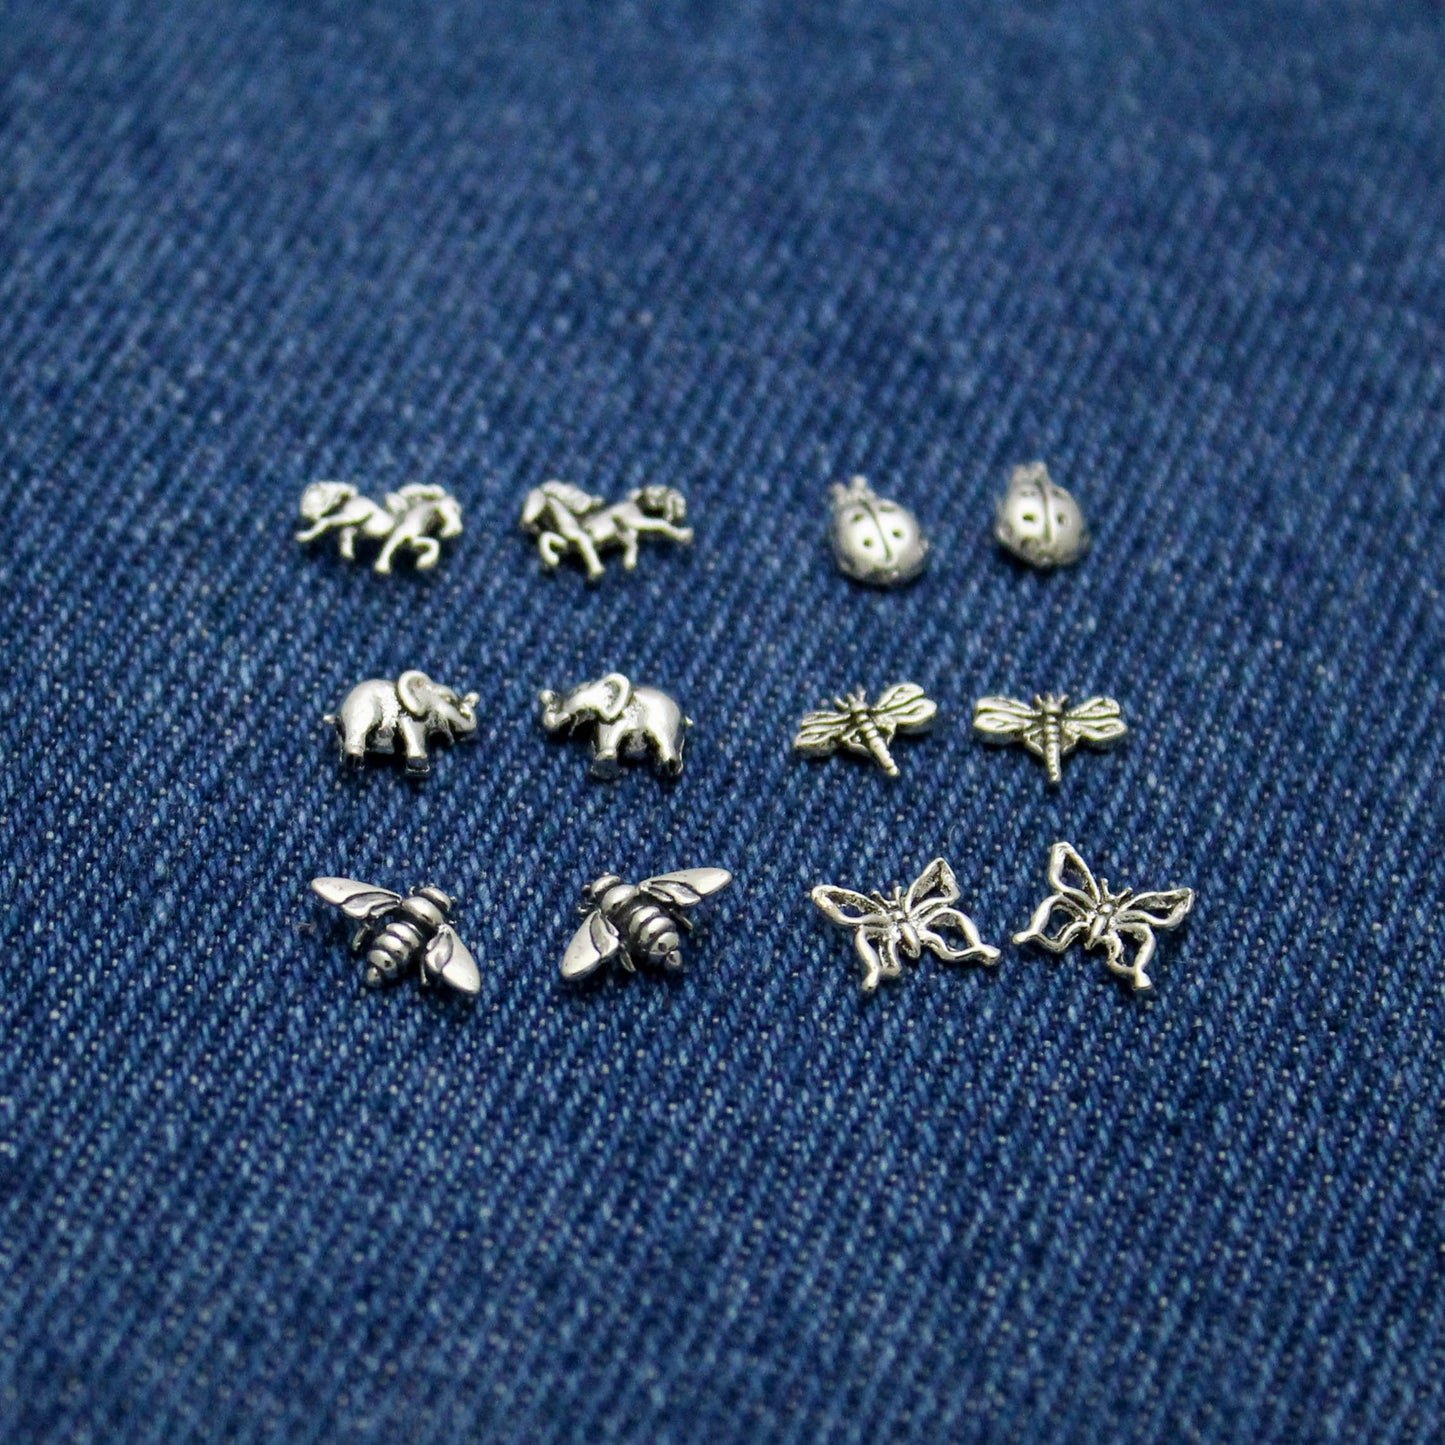 Cute Animal & Insect Studs in Sterling Silver Bumblebee, Lady Bugs, Butterfly, Horses, Elephants and Dragonfly, Minimalist Stud Earrings